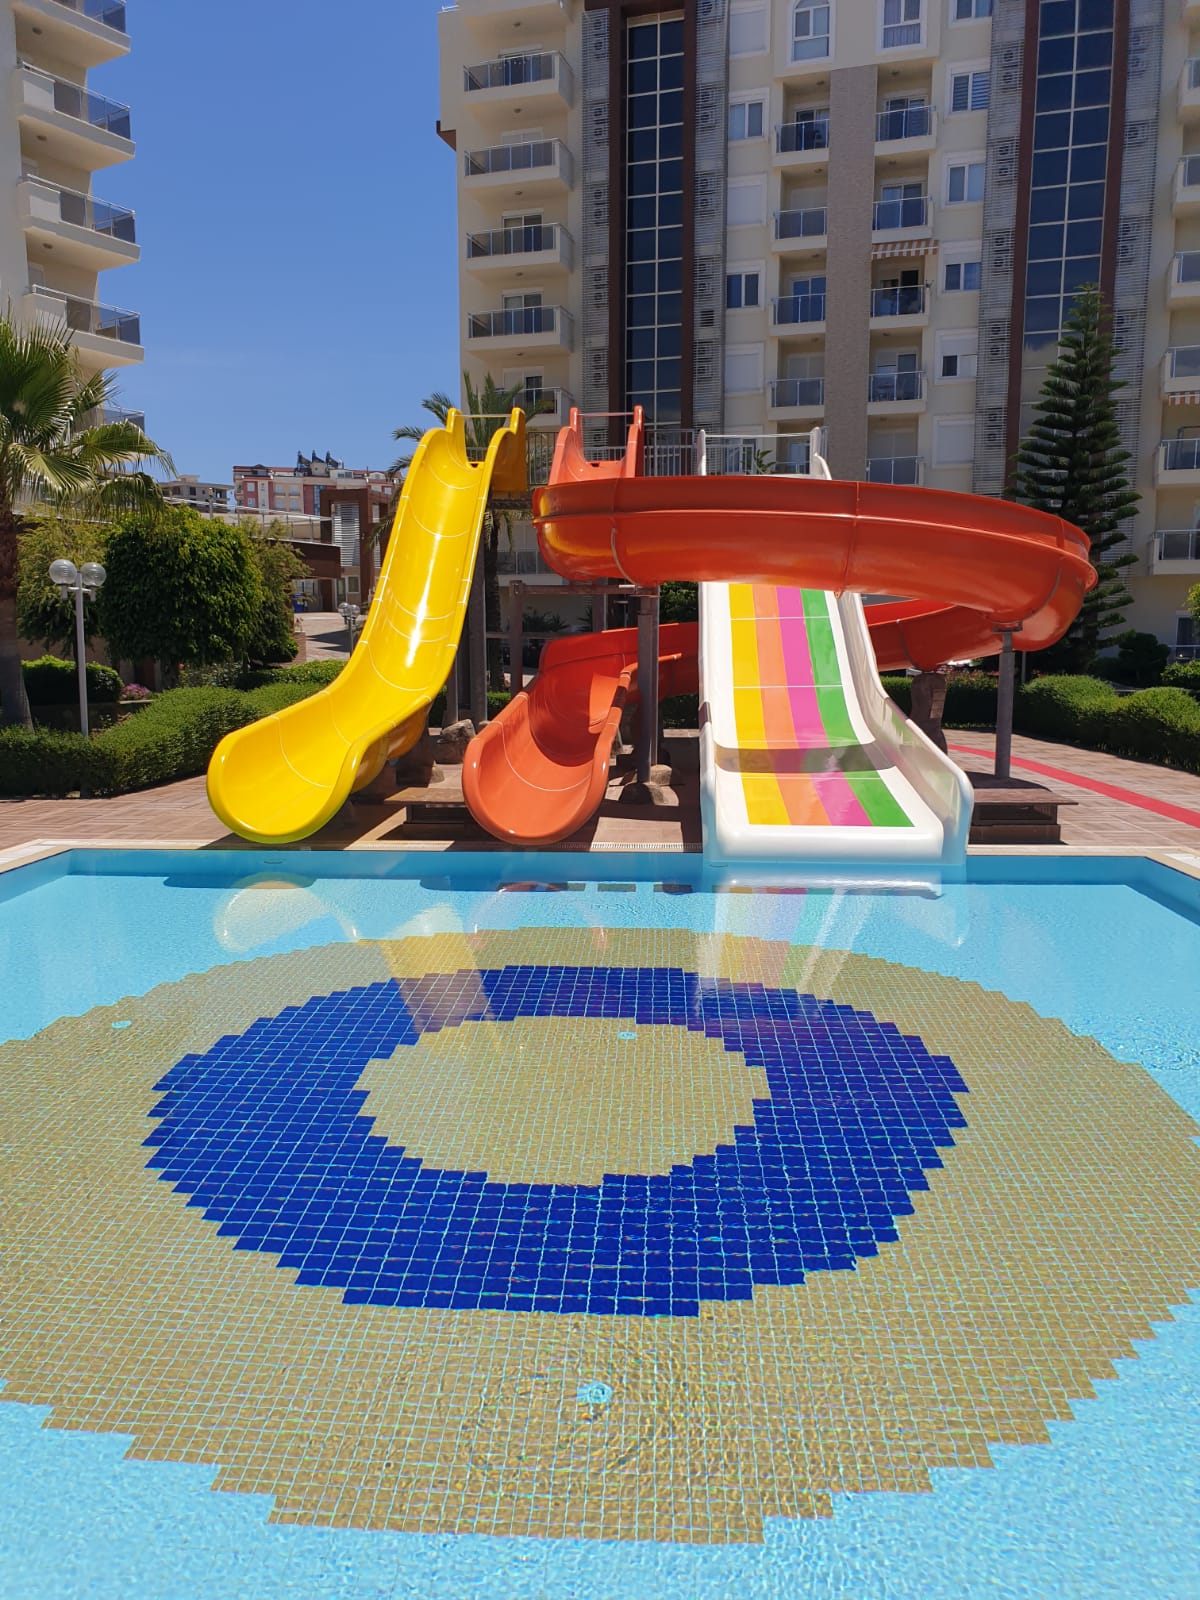 The surface of the water slides in the outdoor pool was repaired and repainted